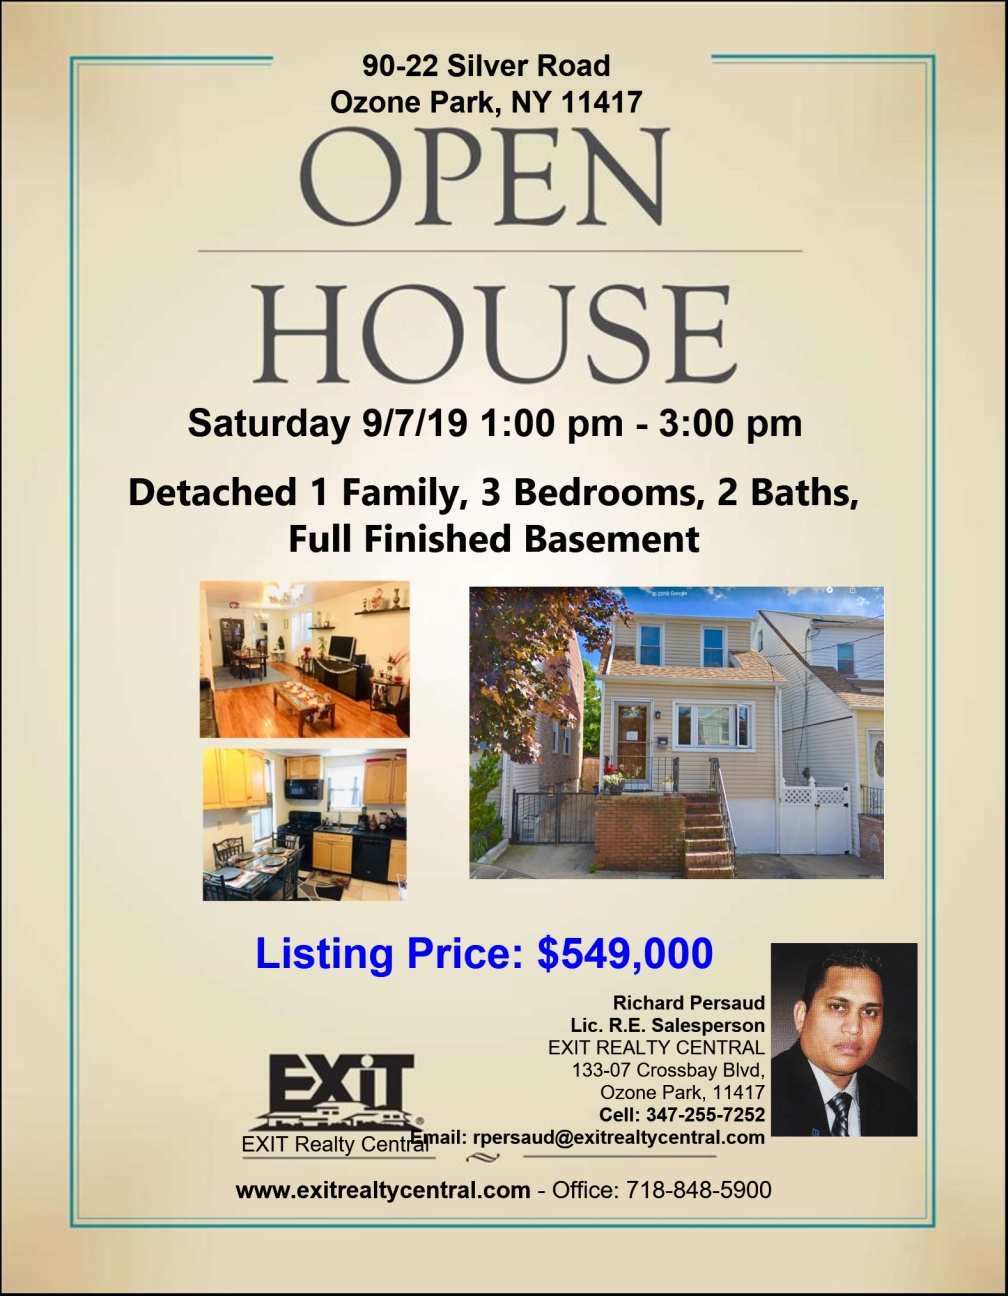 Open House in Ozone Park 9/7 1 - 3 pm